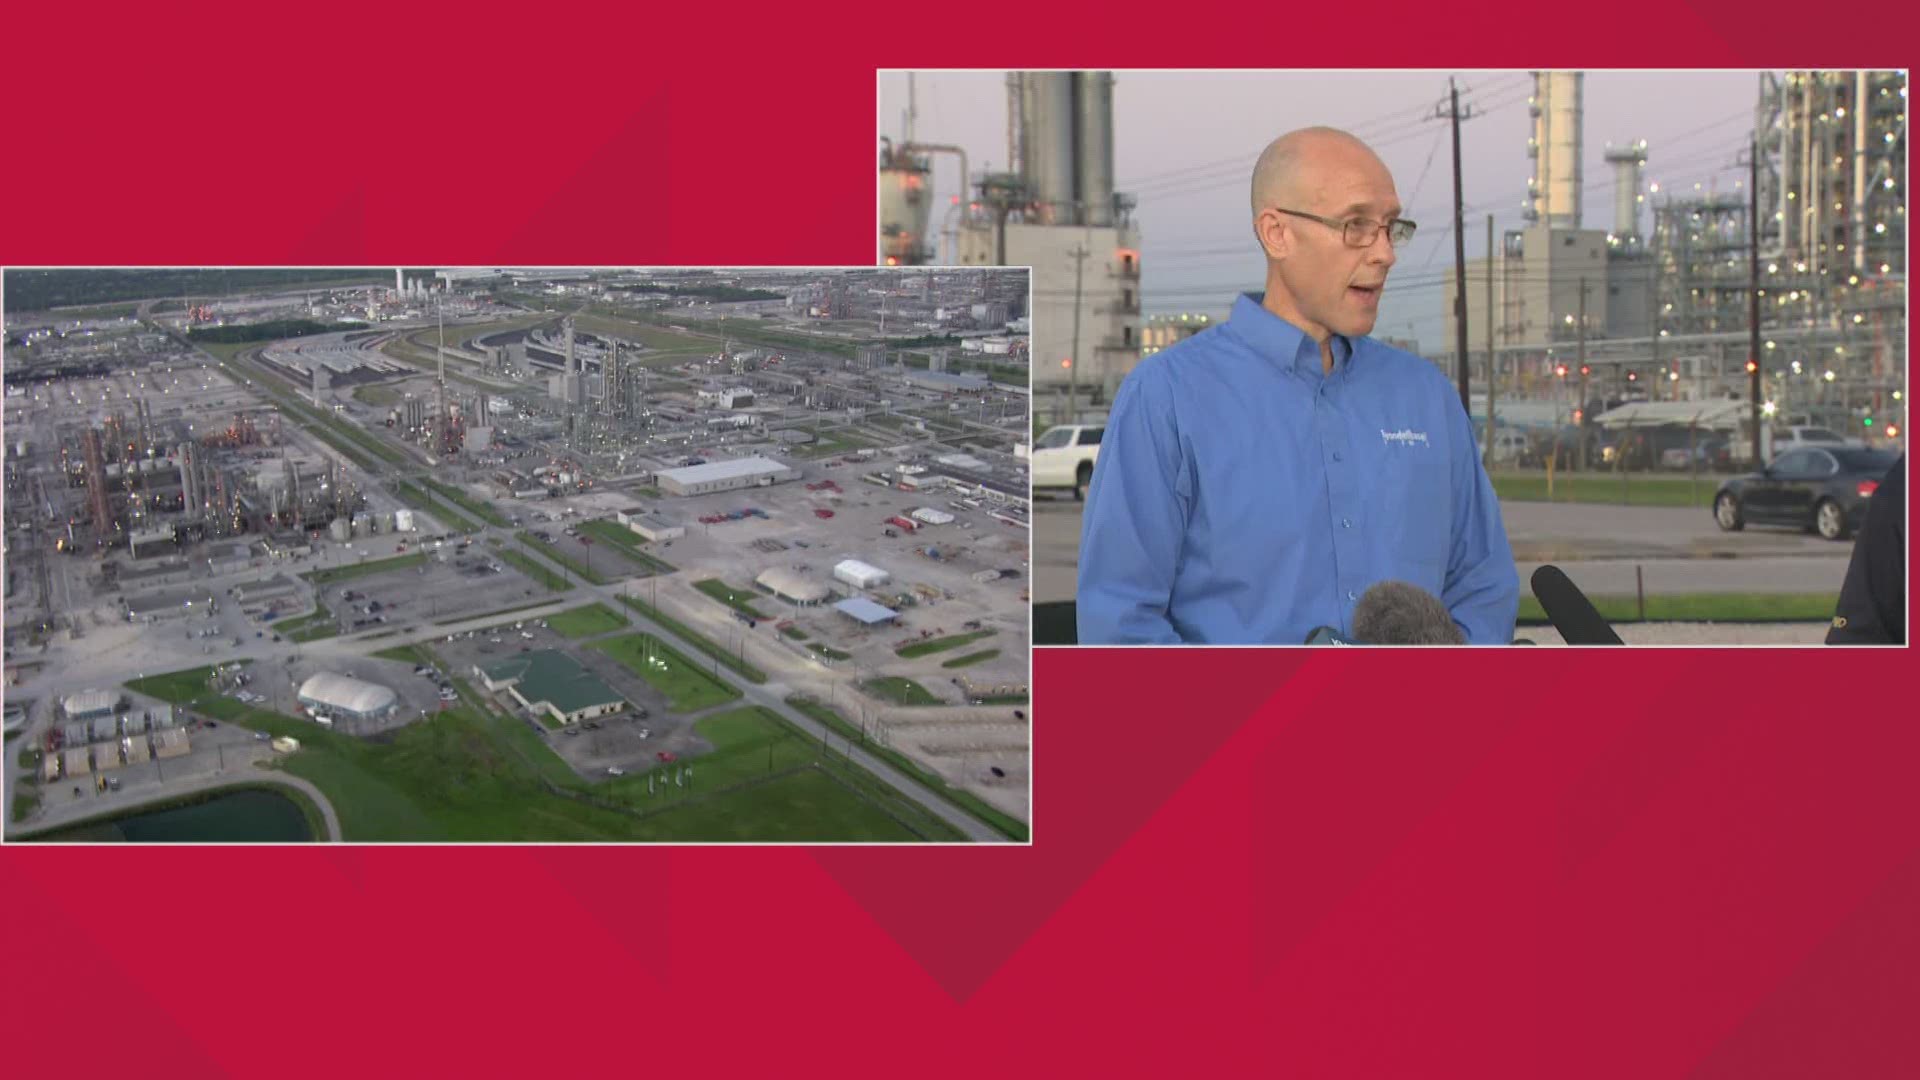 LyondellBasell officials said Wednesday they're fully cooperating with government agencies in investigating the cause of deadly chemical leak.